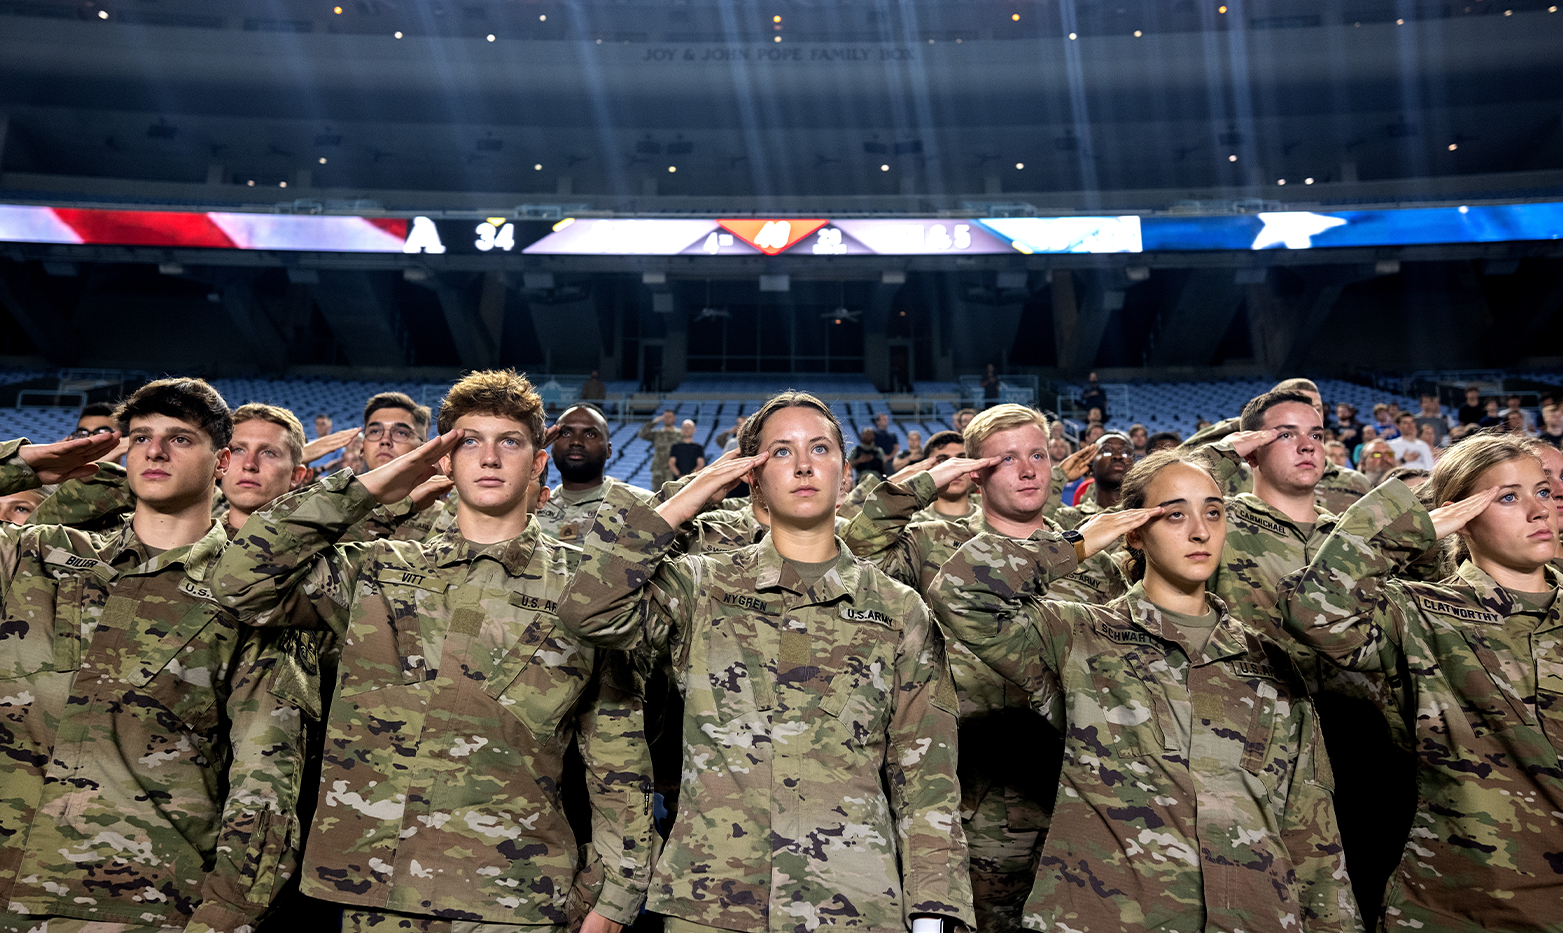 A group of military members in stadium seats saluting.